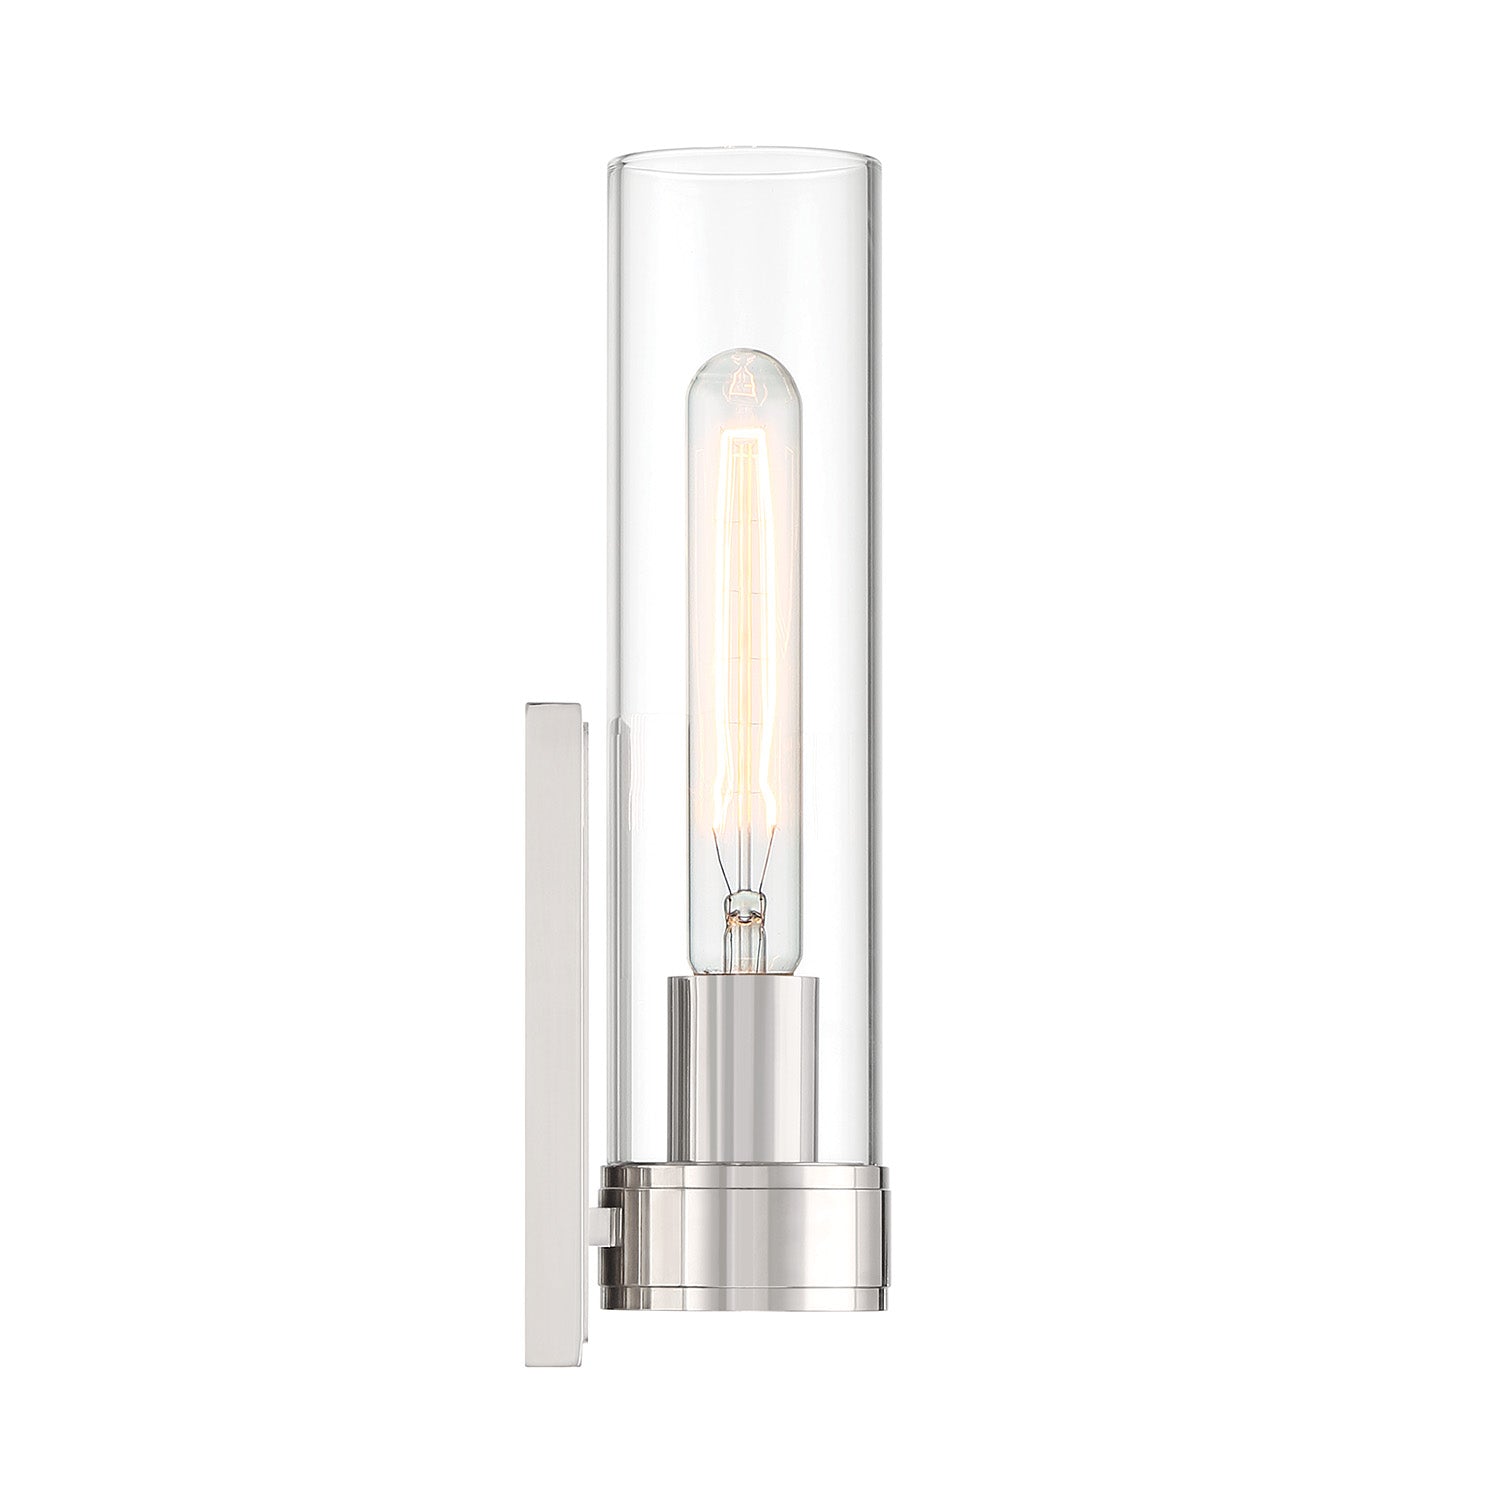 Sutton 1-Light Wall Sconce, Polished Nickel